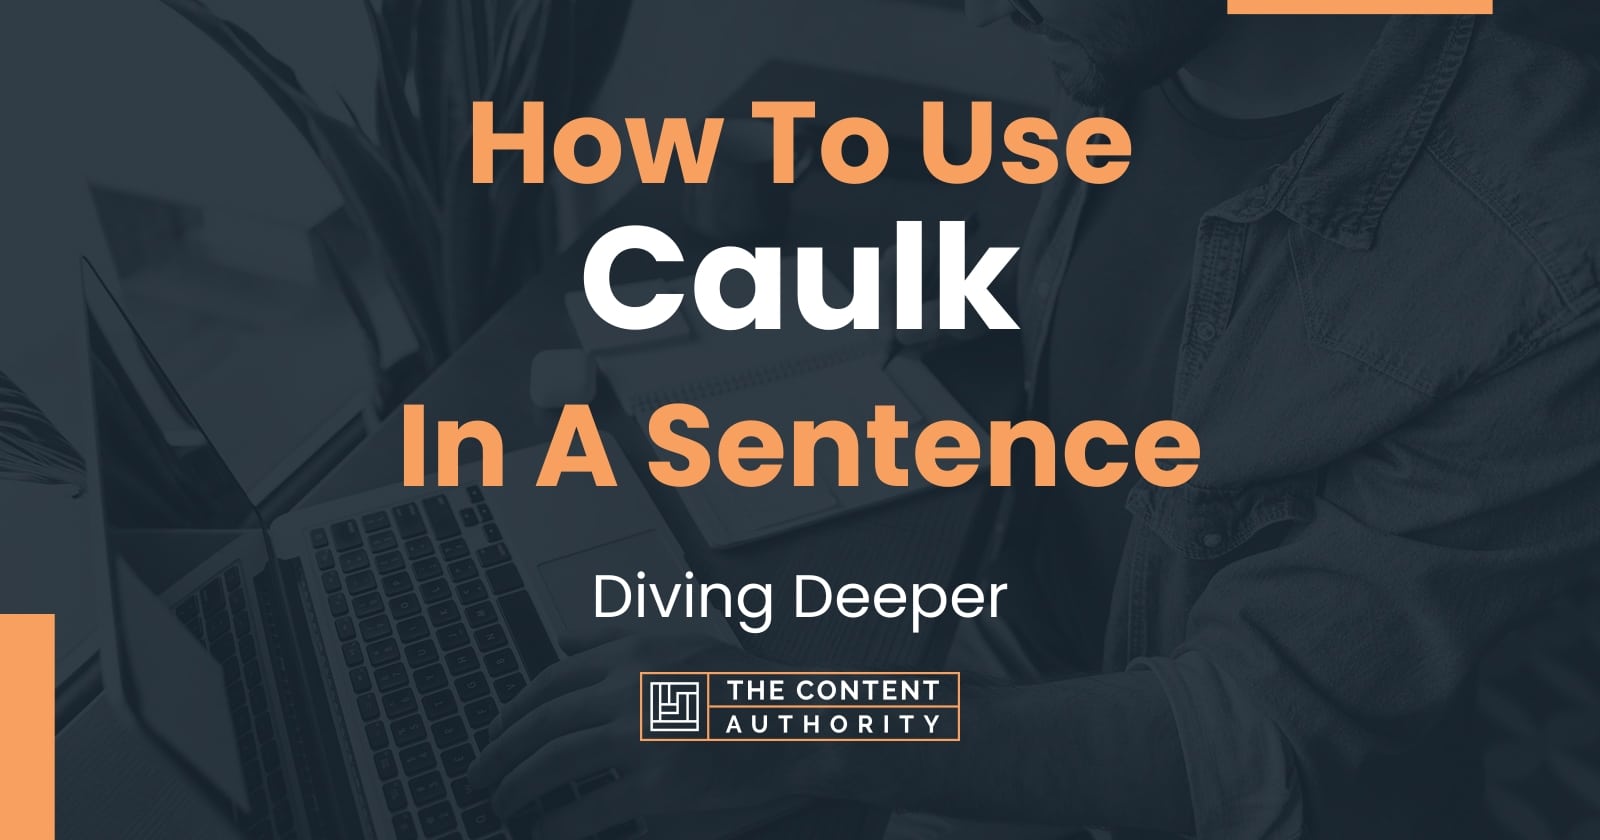 How To Use Caulk In A Sentence 